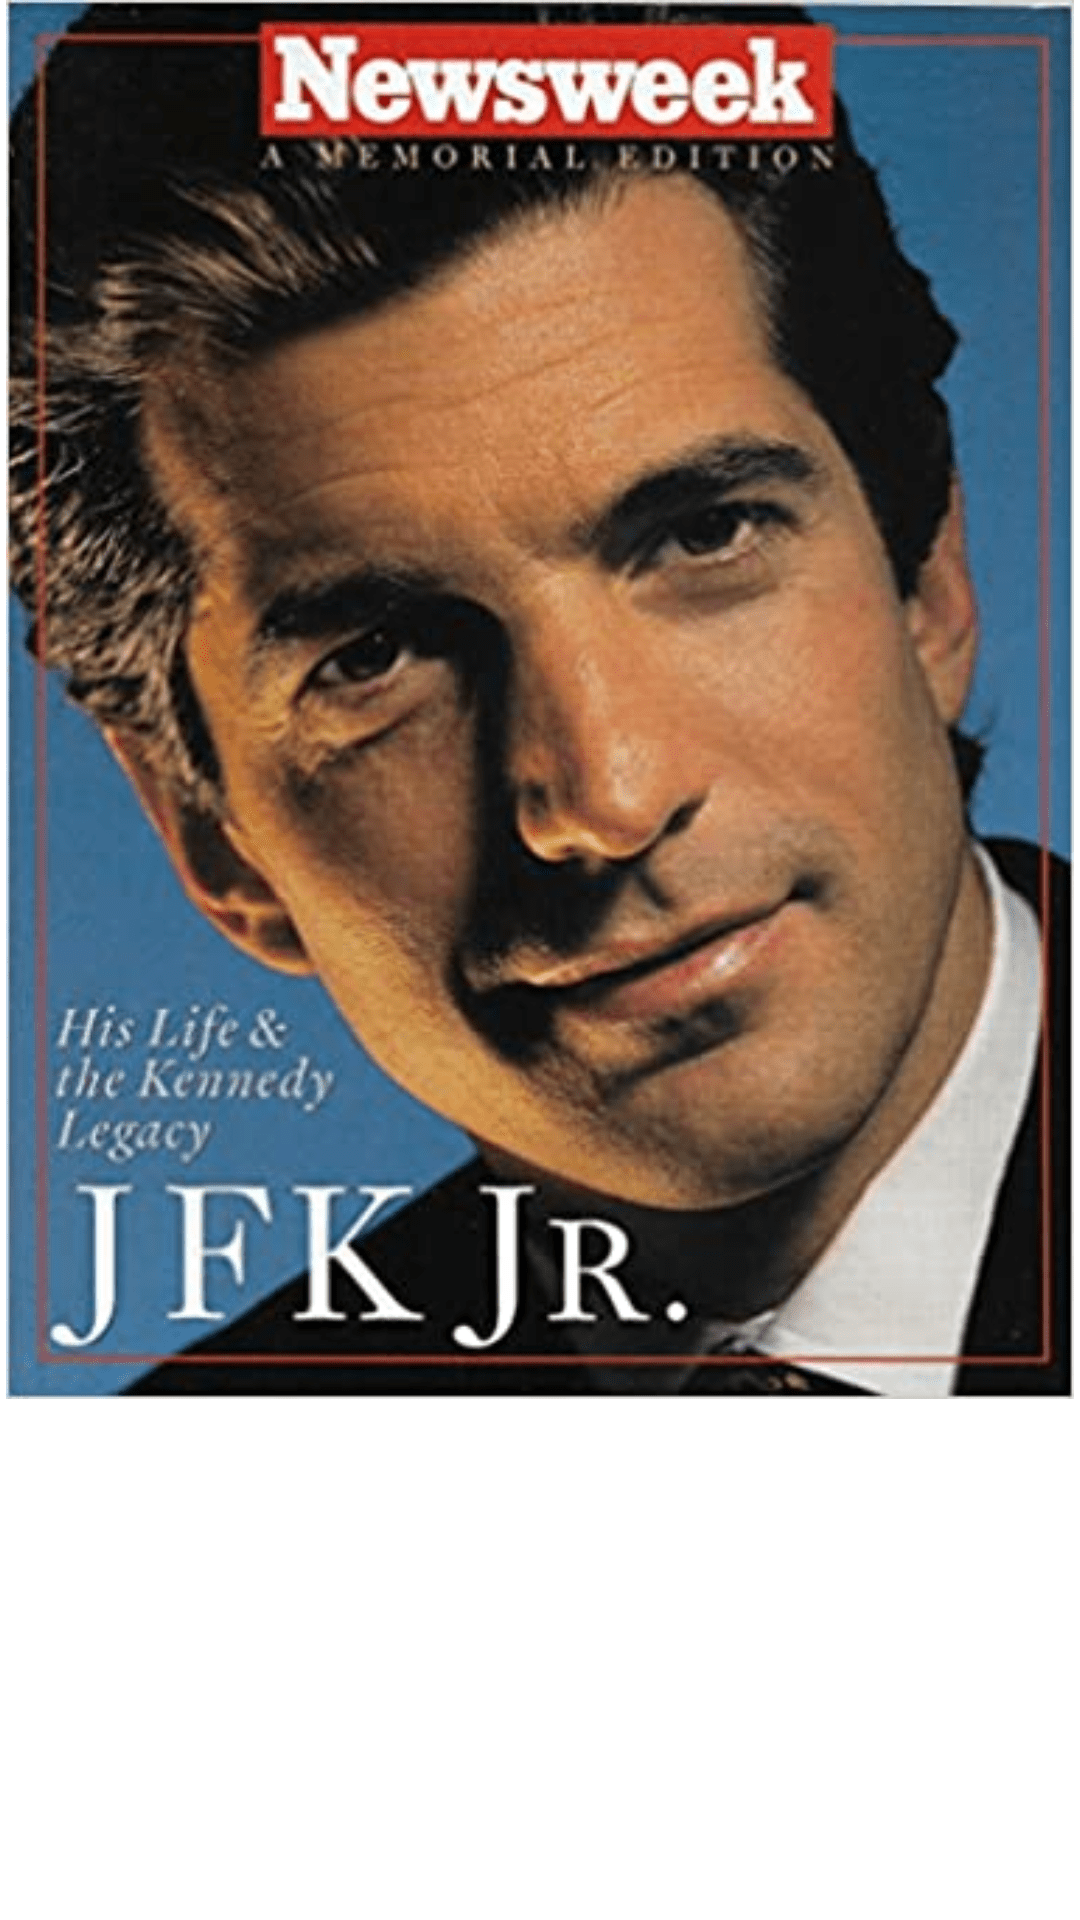 John F. Kennedy Jr.: His Life and the Kennedy Legacy - Newsweek A Memorial Edition